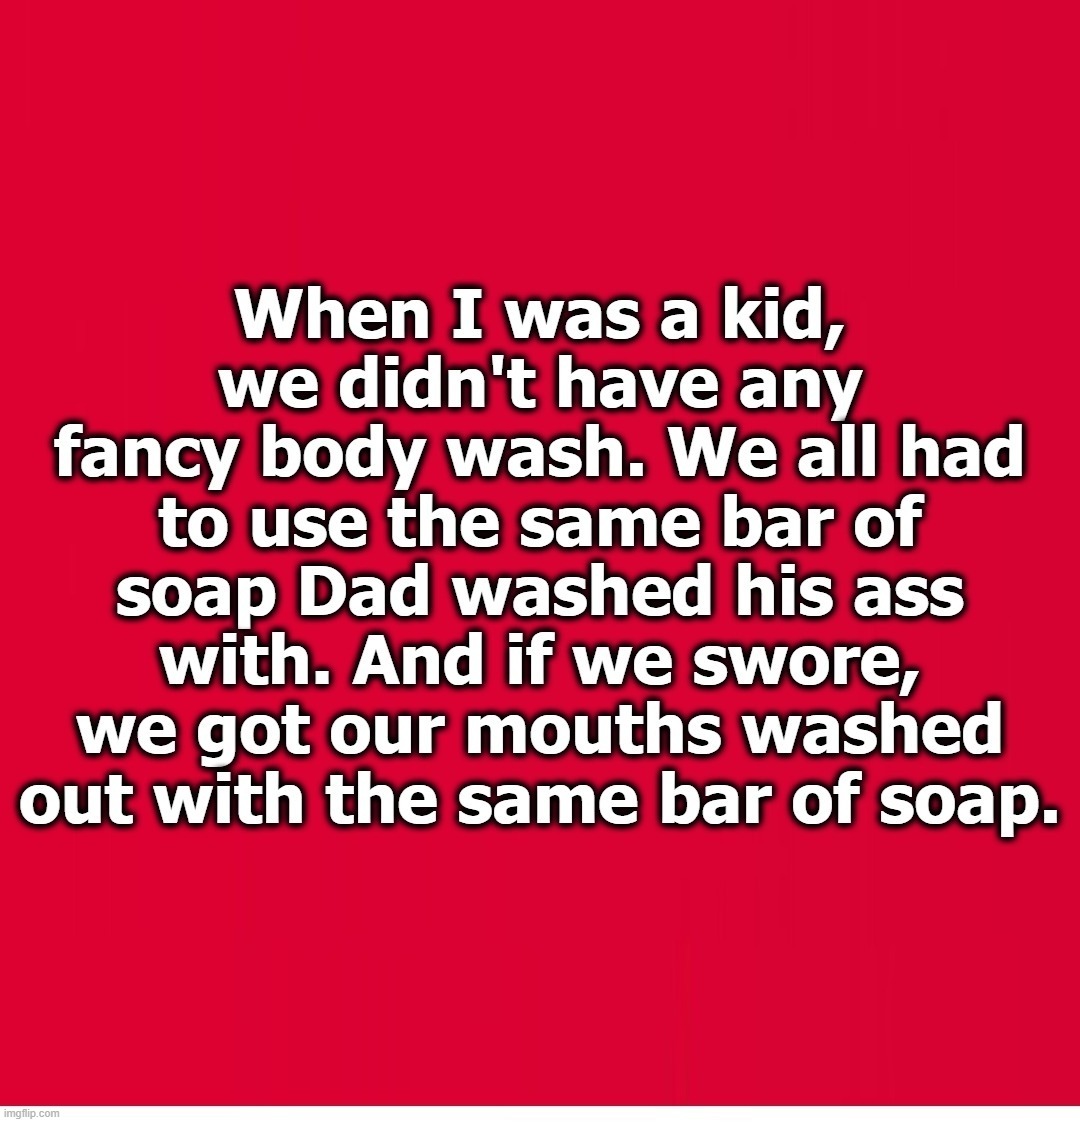 We are not the same! | image tagged in we are not the same,dad jokes,dad joke meme,assholes,don't drop the soap,dirty laundry | made w/ Imgflip meme maker